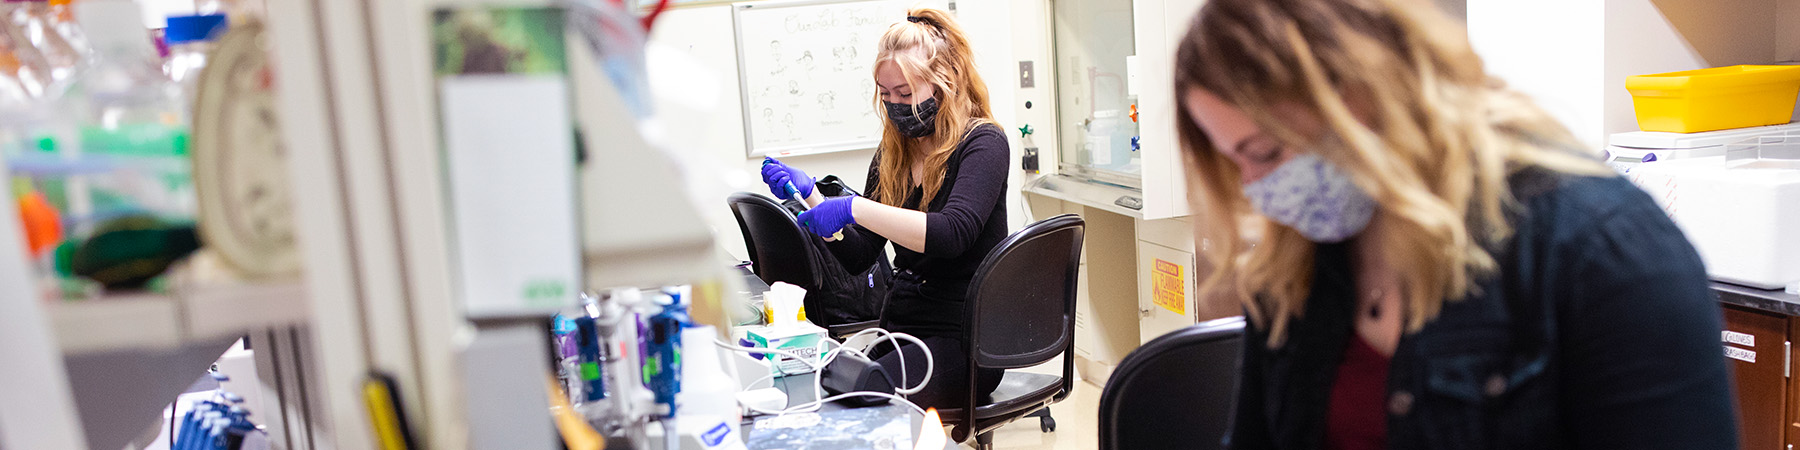 Loyola University Chicago graduate student Taylor Miller-Ensminger works on experiments in the Bioinformatics Lab